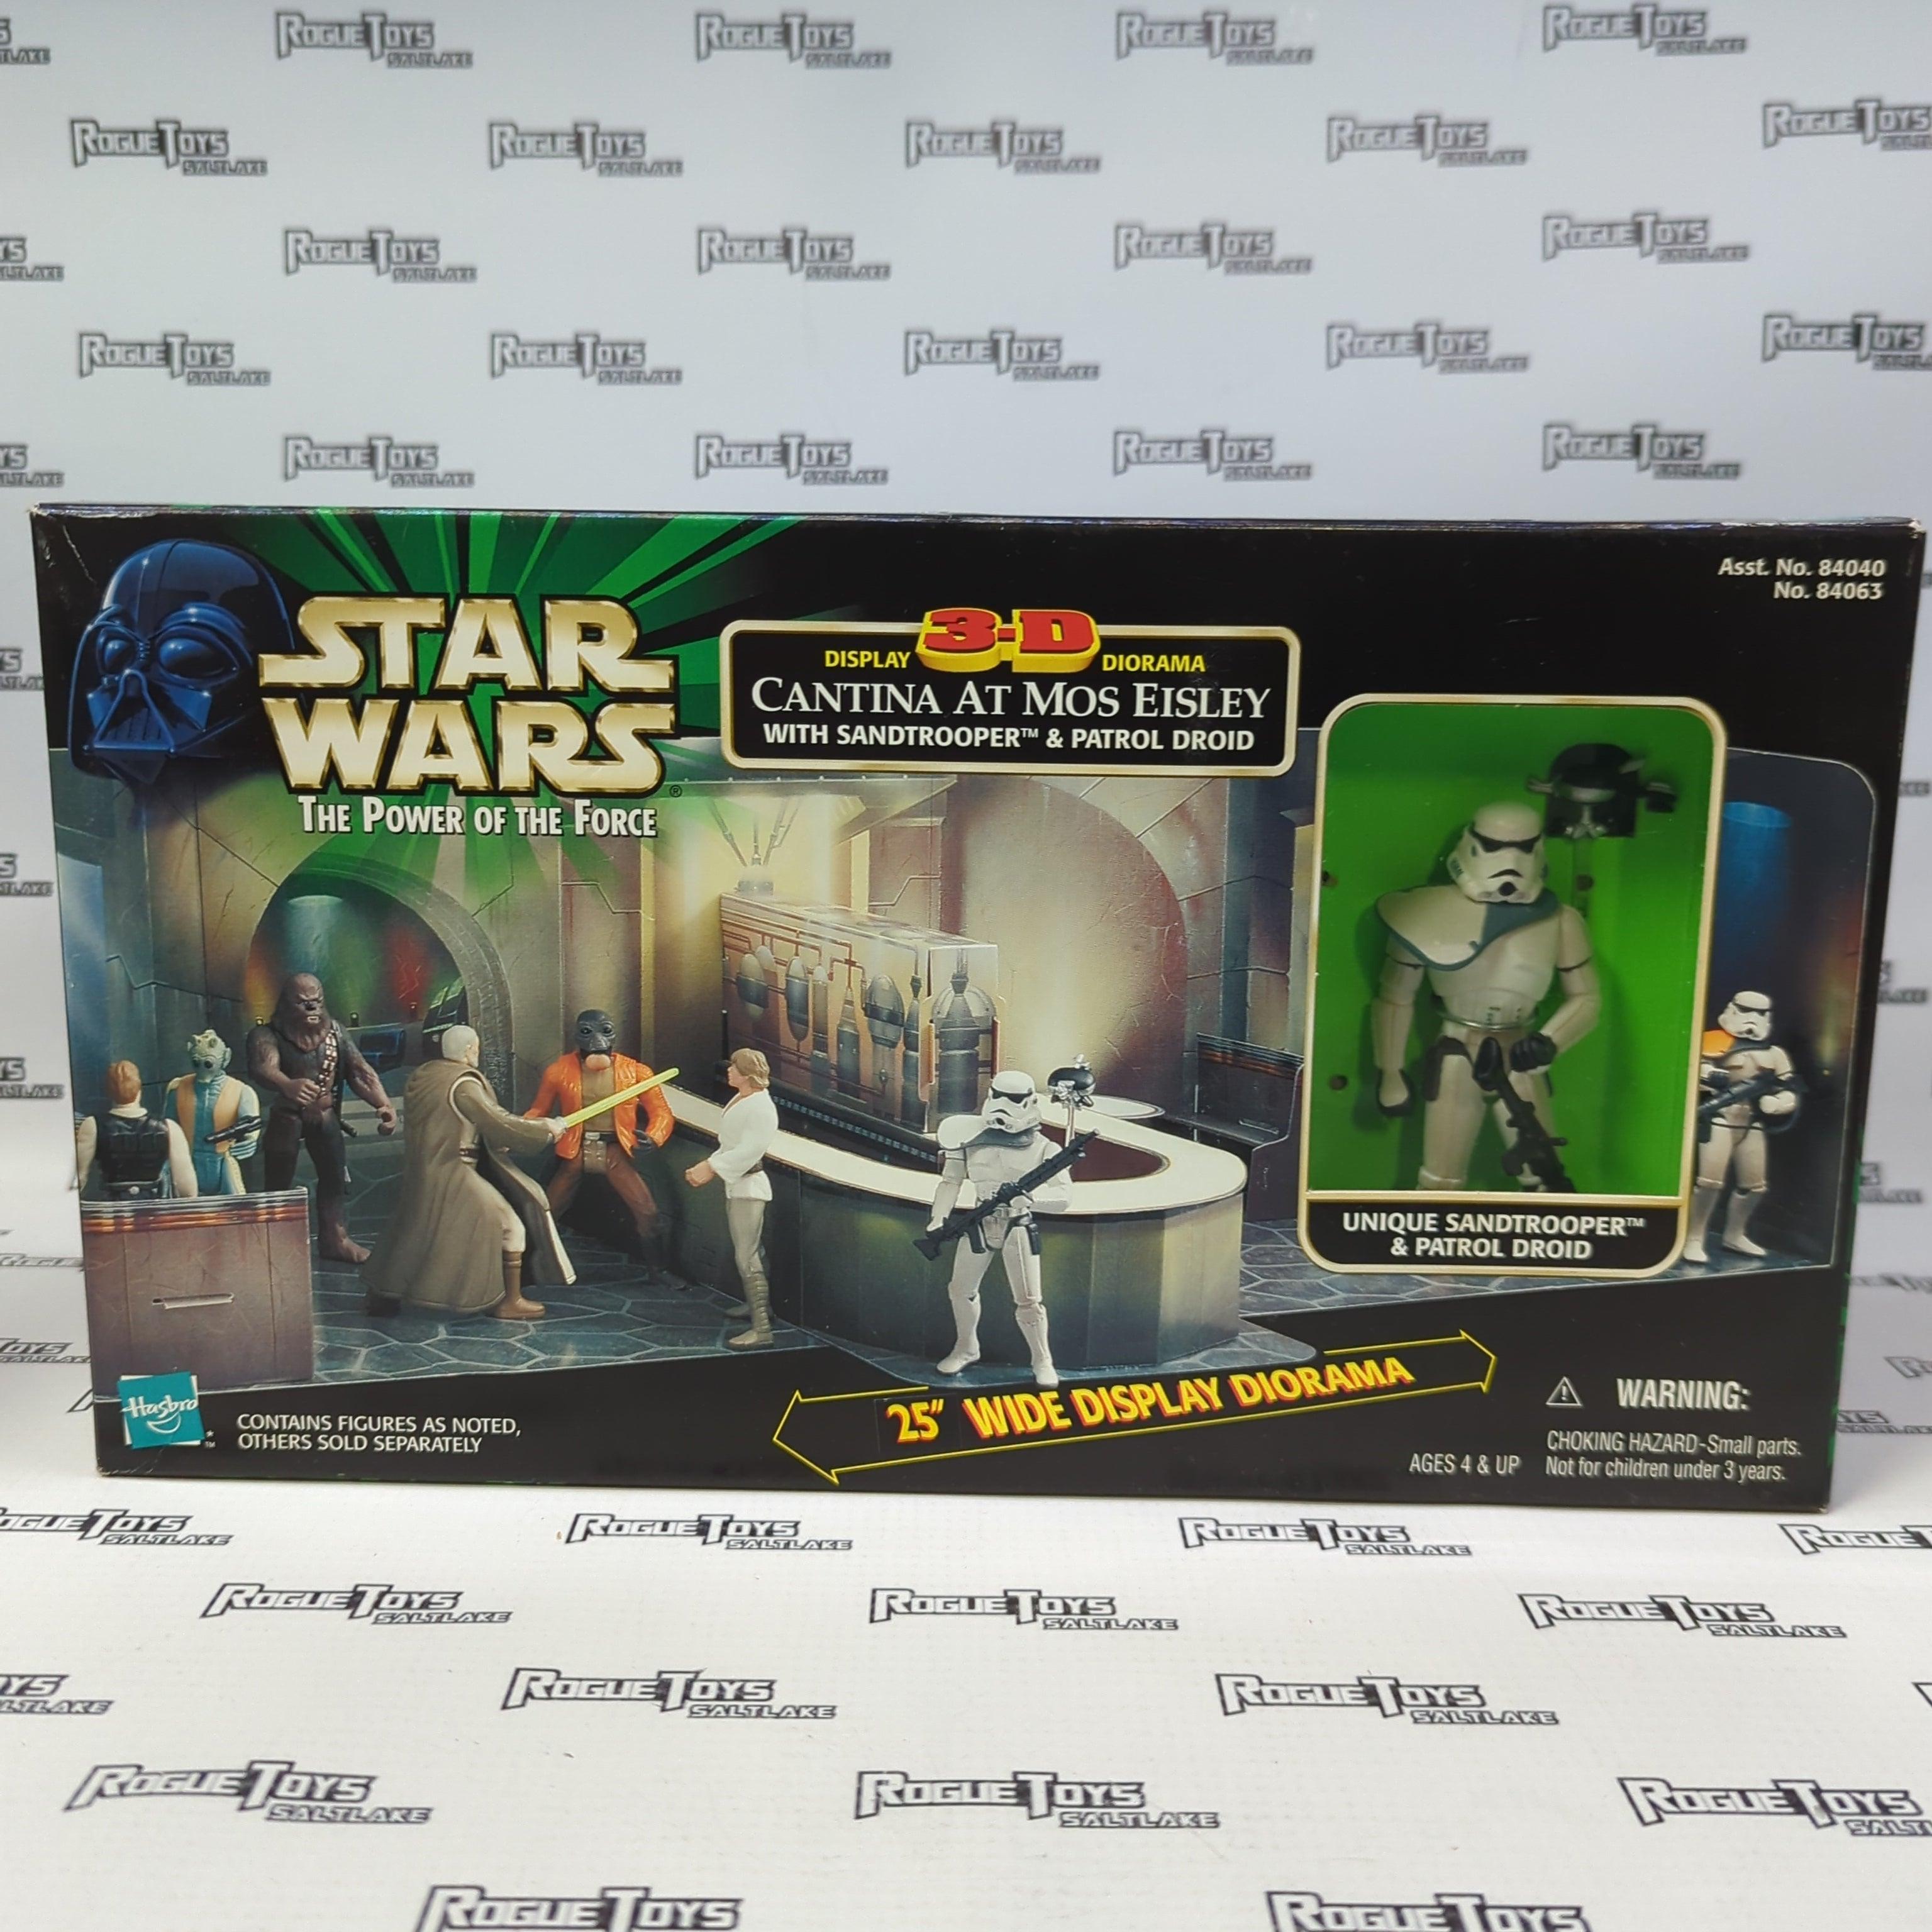 Hasbro Star Wars The Power of the Force 3-D Display Diorama Cantina at Mos Eisley w/Sandtrooper & Patrol Droid - Rogue Toys